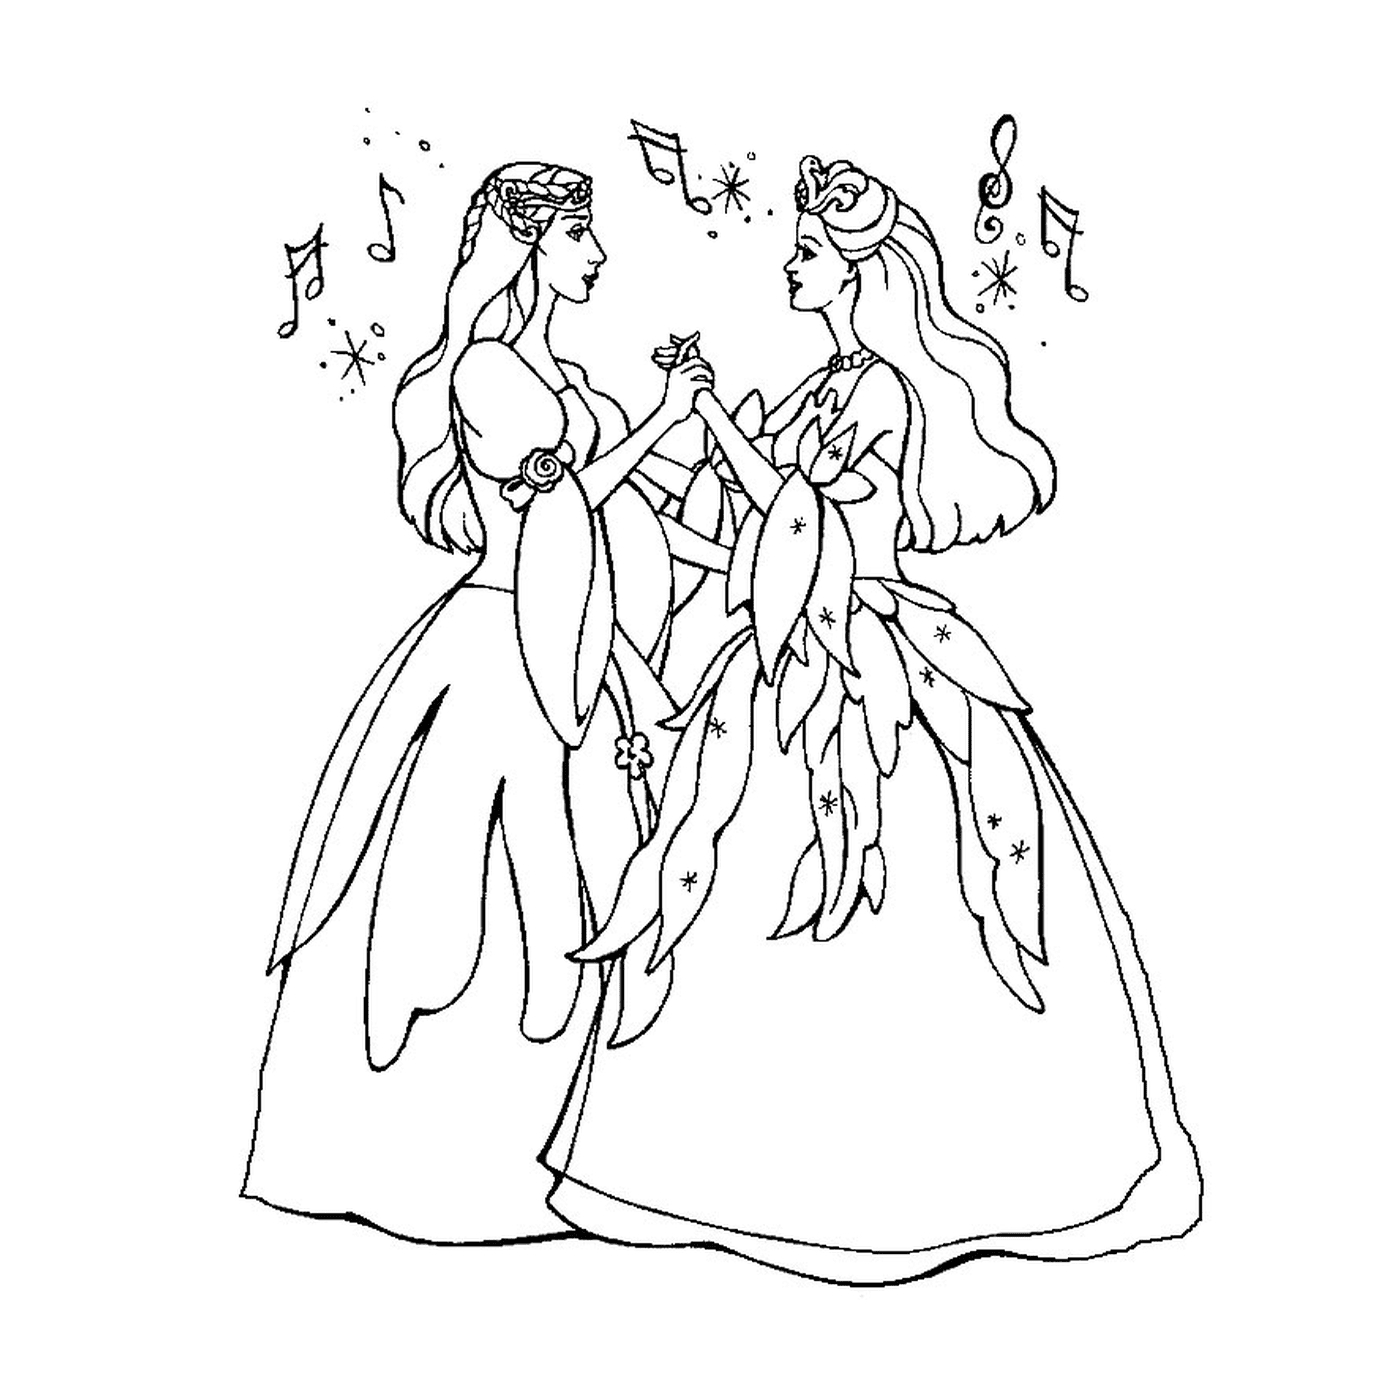  Two women dressed as fairies 